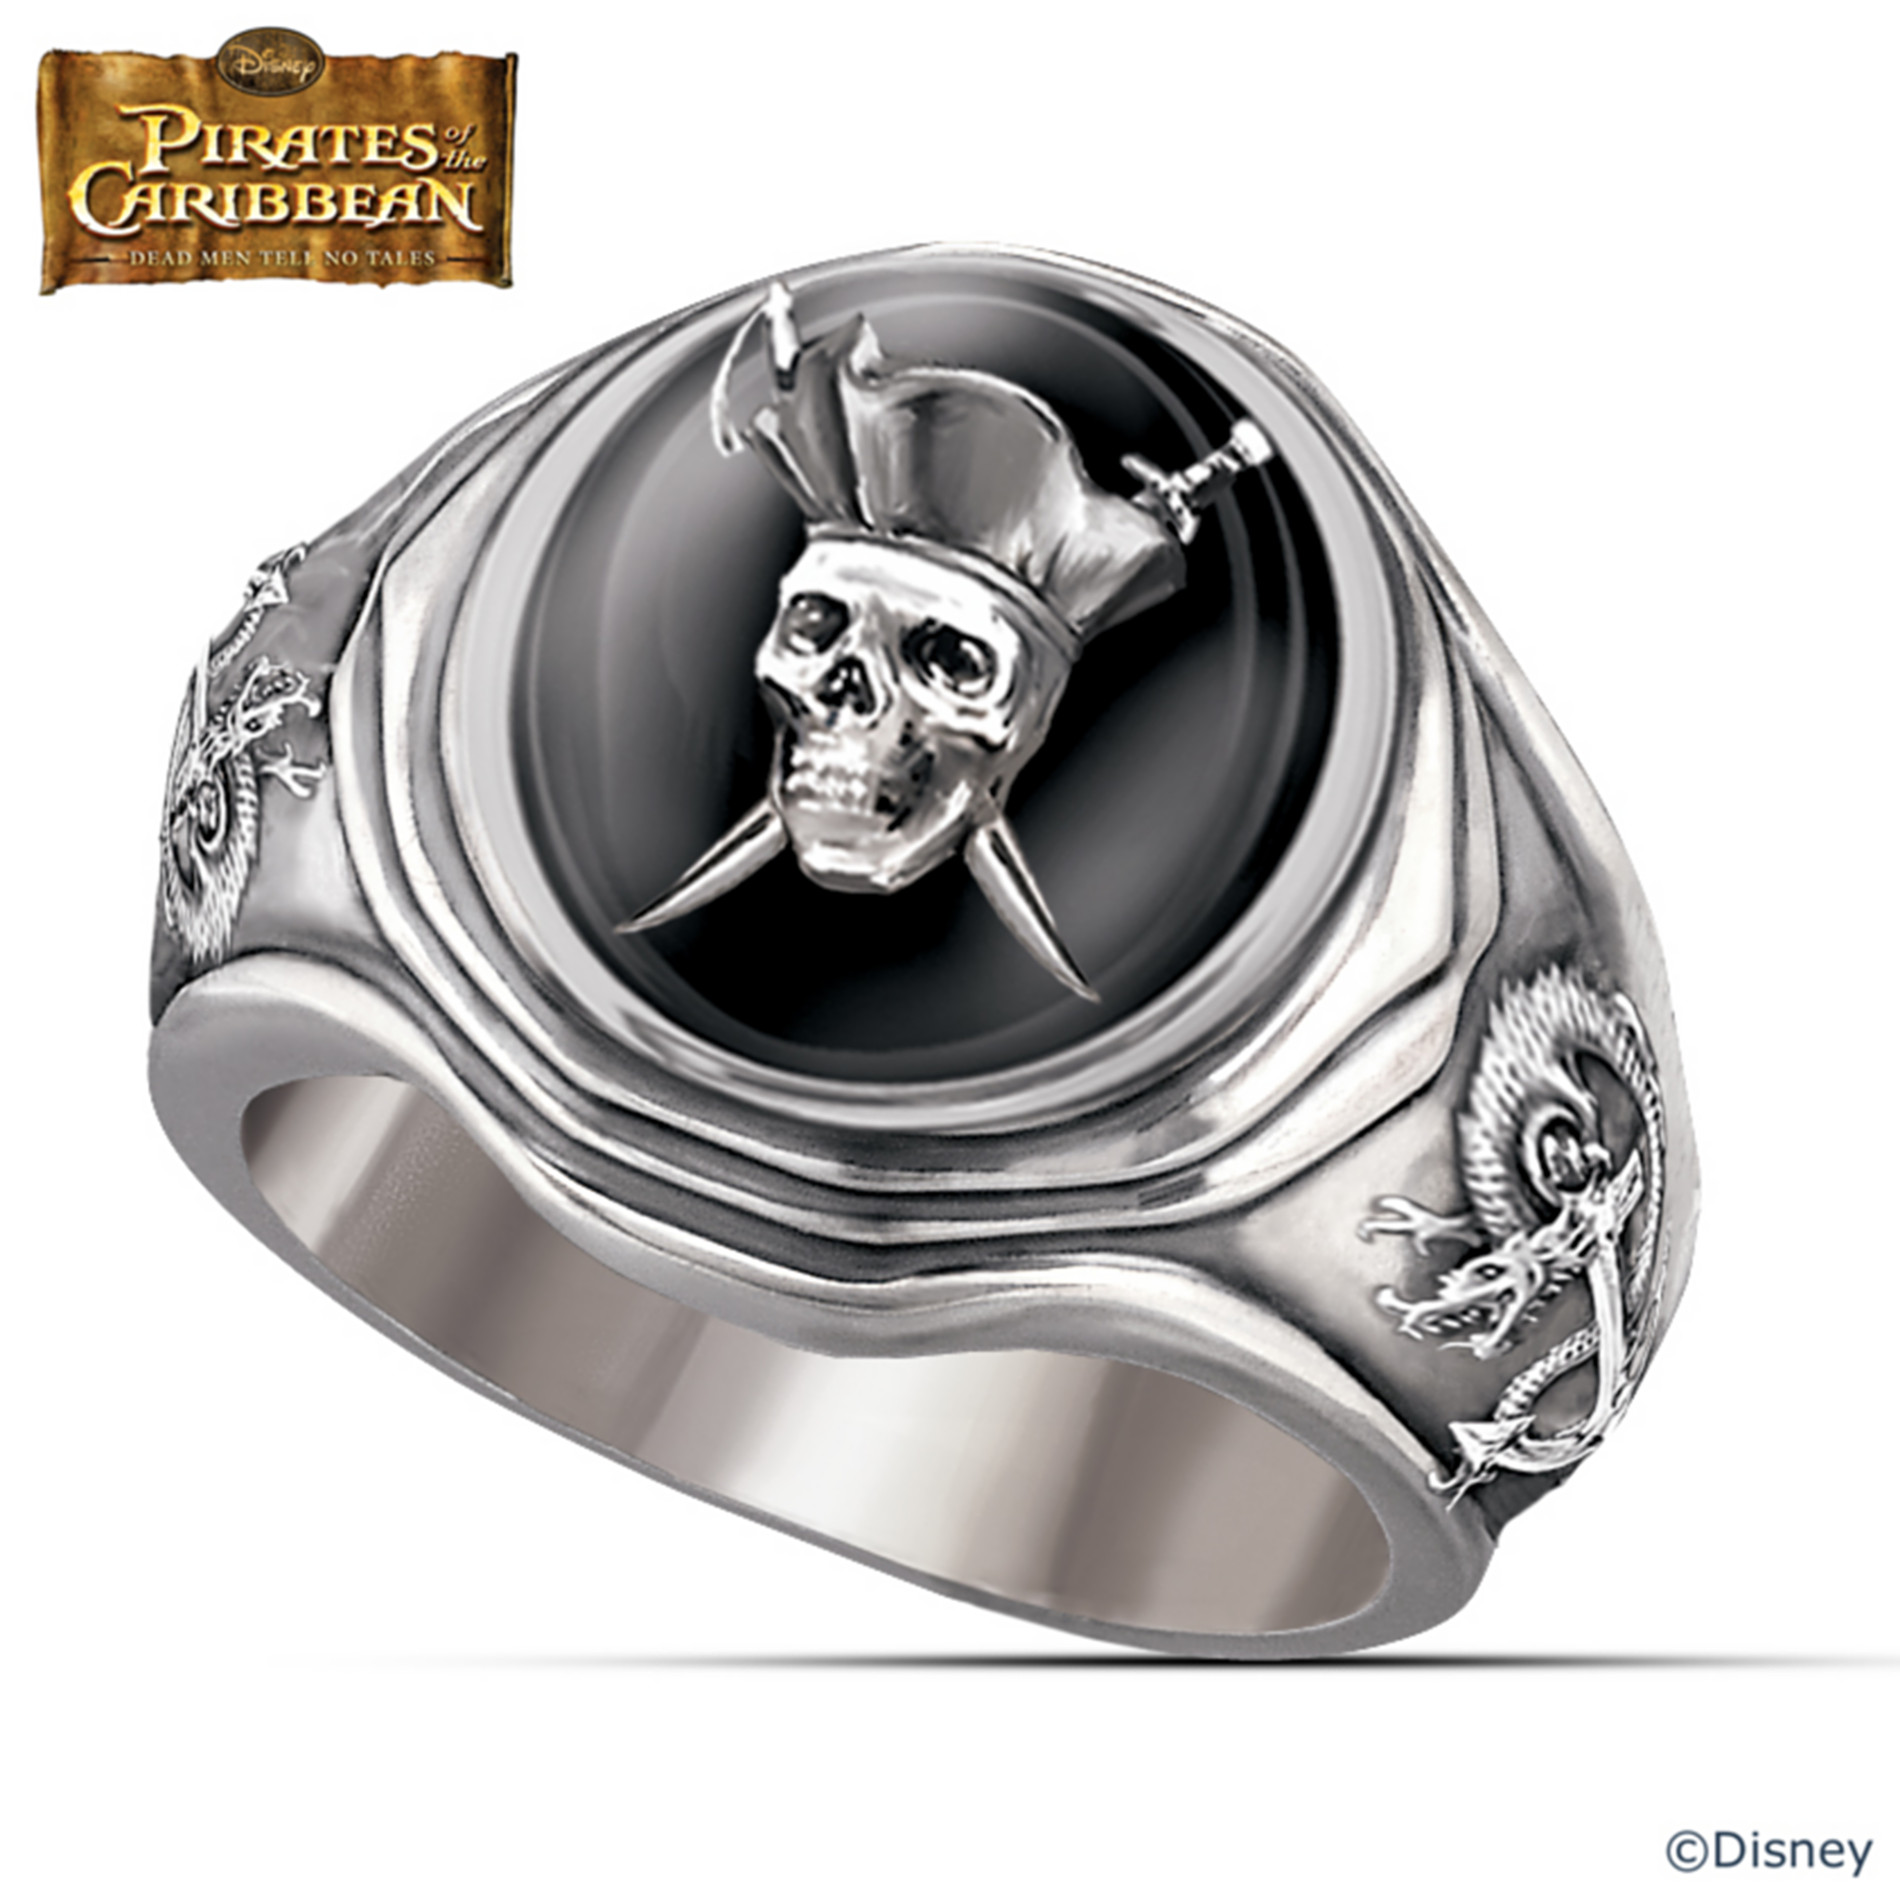 Pirates Of The Caribbean Jewelry Rings from